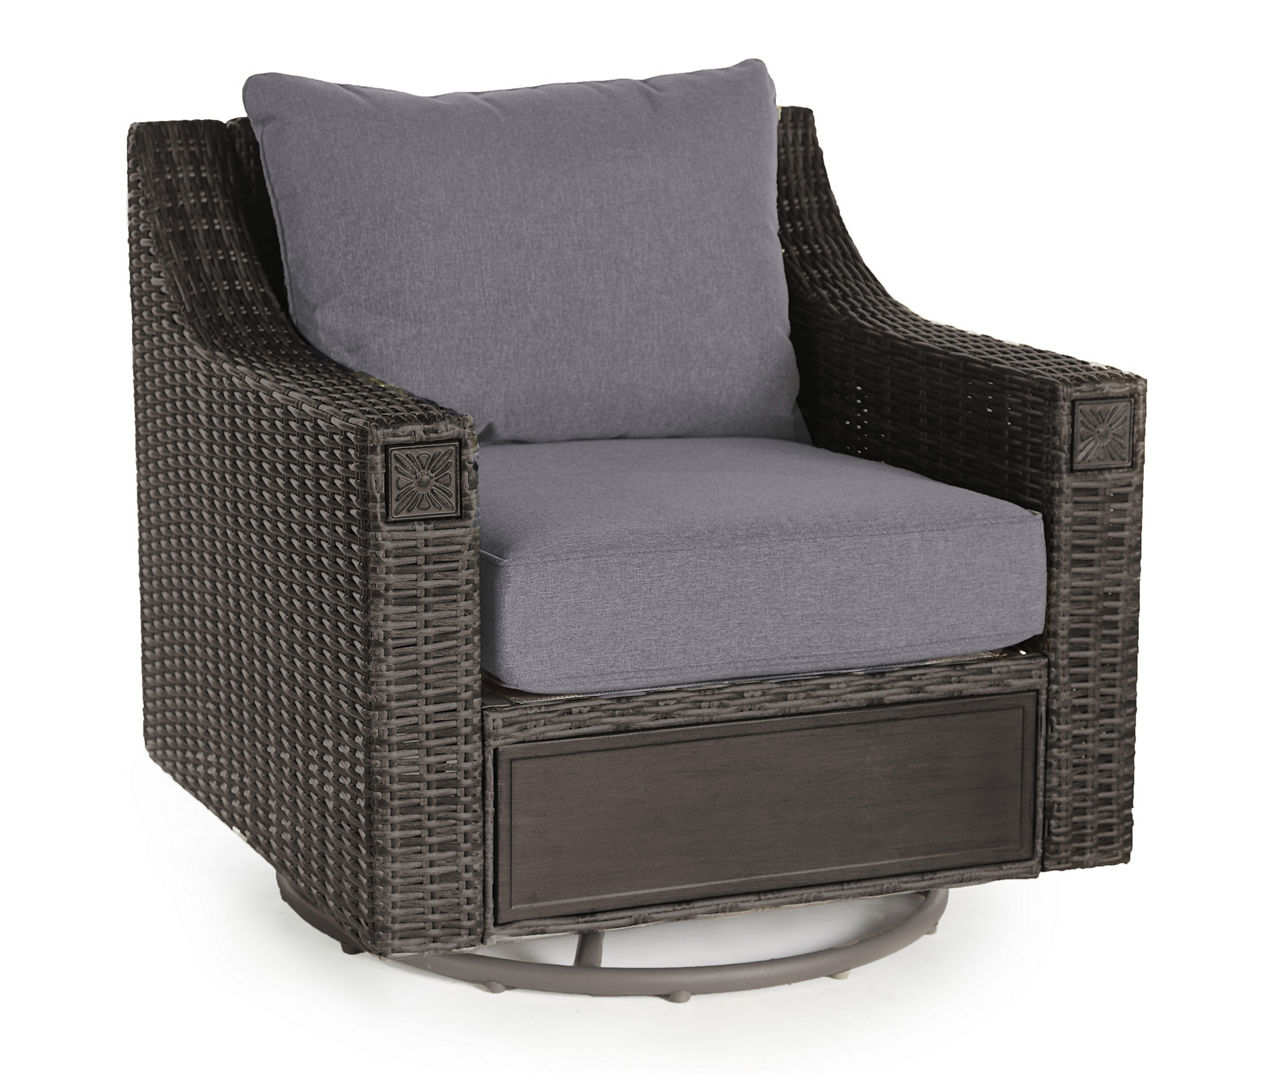 Sandpointe Gray All-Weather Wicker Cushioned Patio Glider Chair